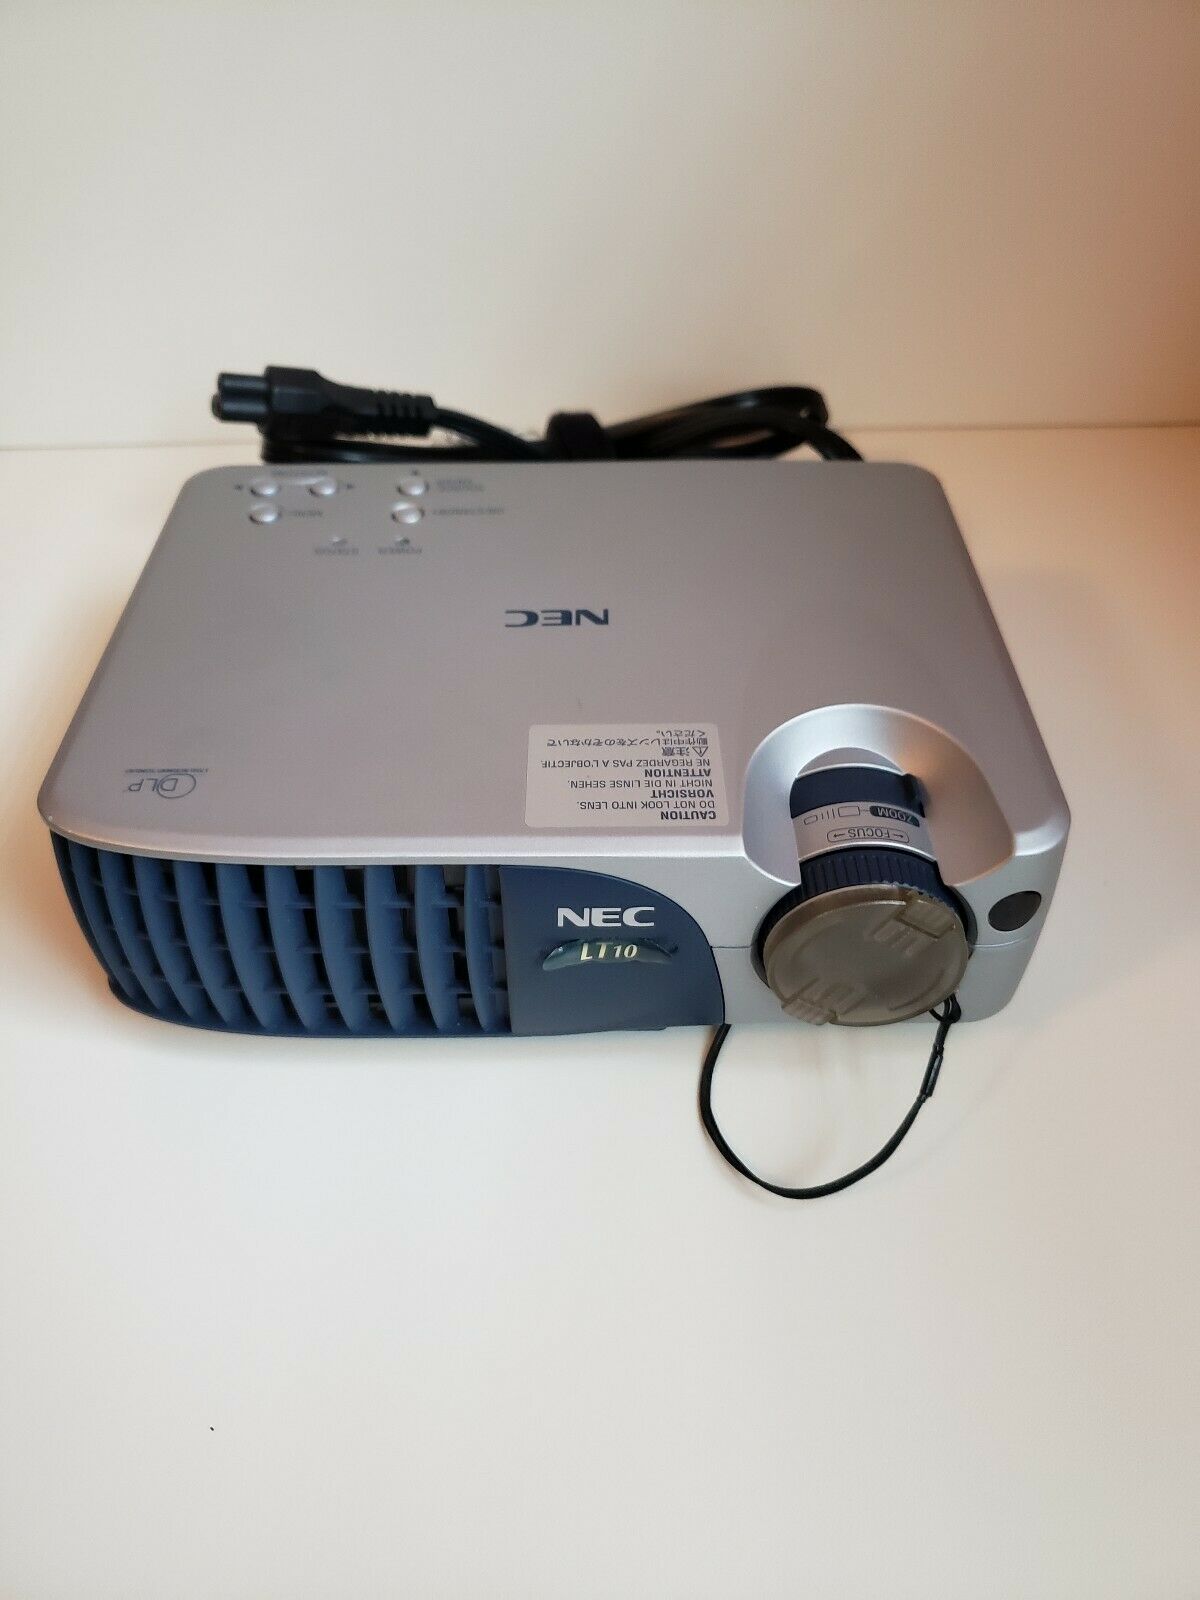 Nec Lt10 Mini Projector With Carrying Case Used No Remote